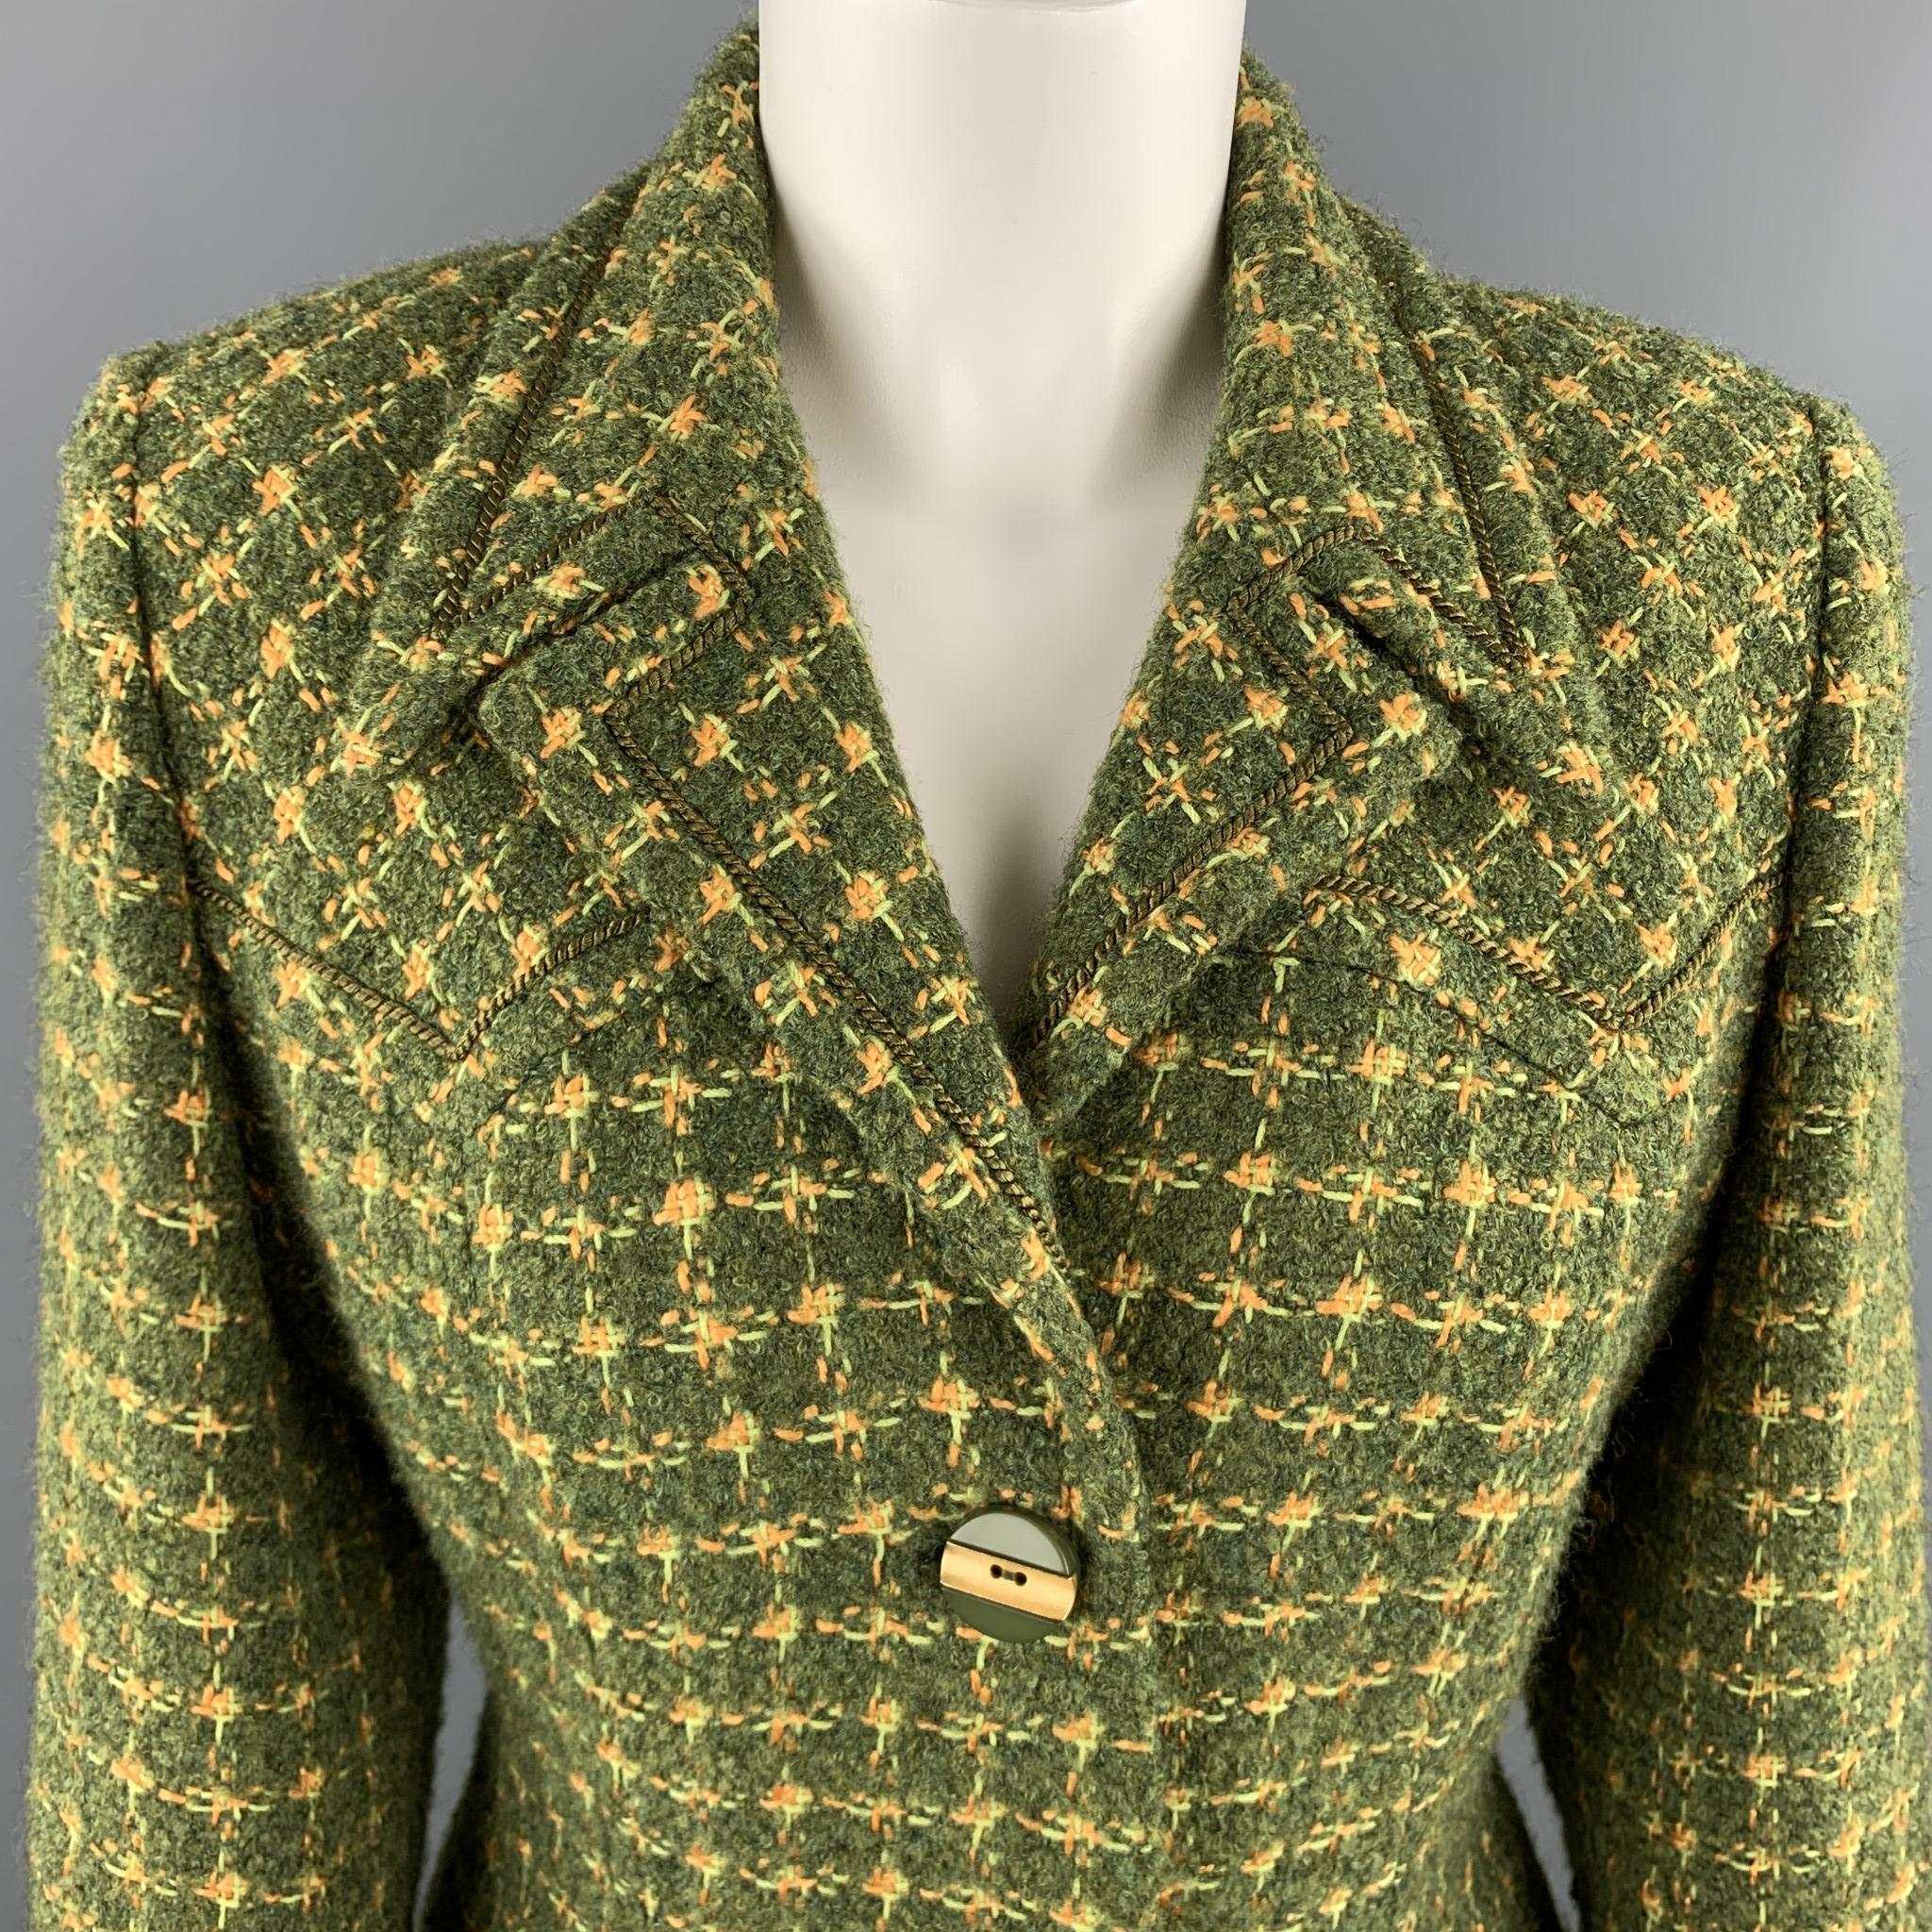 Vintage HARDY AMIES skirt suit comes in green and gold tweed and includes a single breasted blazer with a downward peak lapel, rope piping, acrylic green and metallic gold statement buttons and matching pencil skirt. Made in UK.

Excellent Pre-Owned